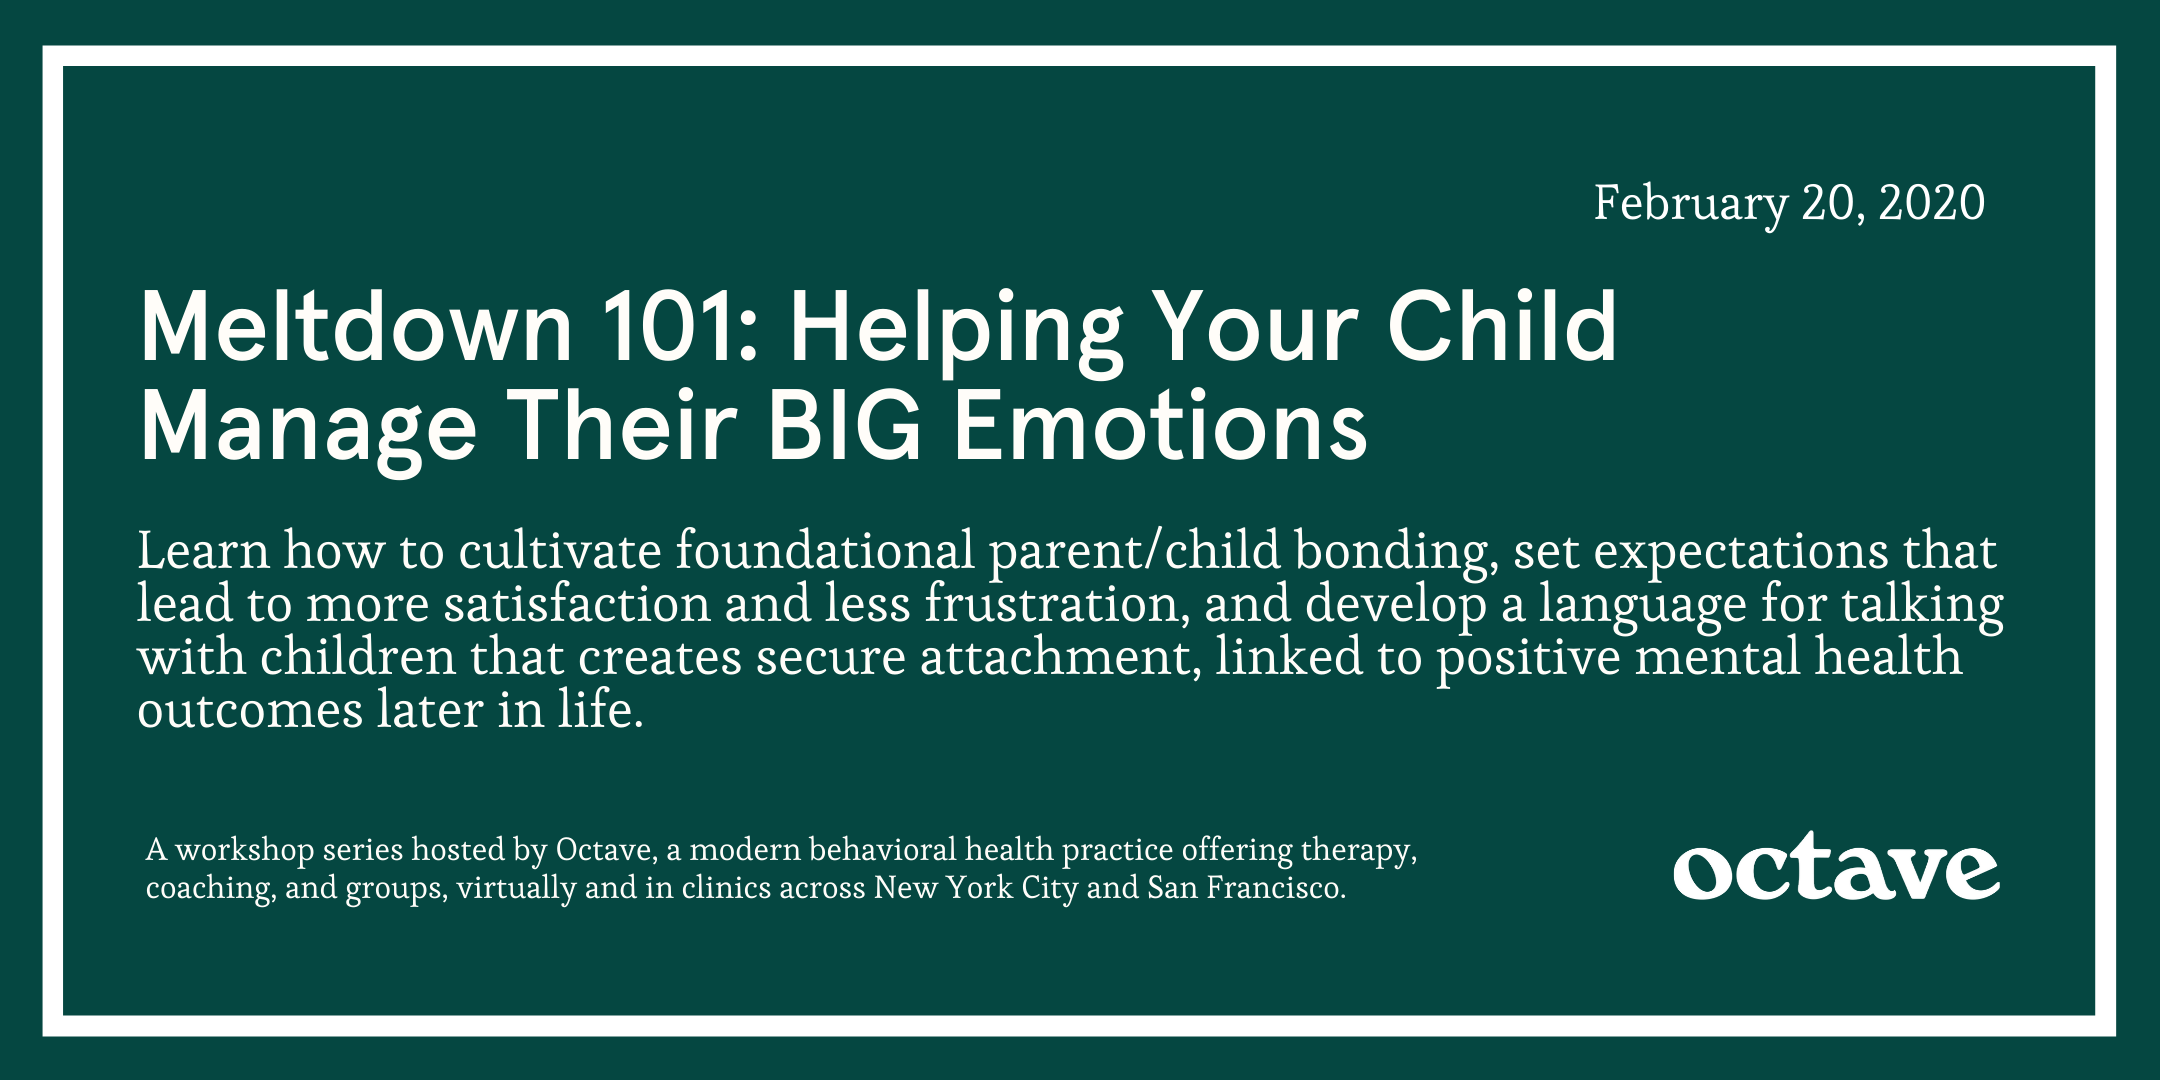 Meltdown 101: Helping Your Child Manage Their BIG Emotions